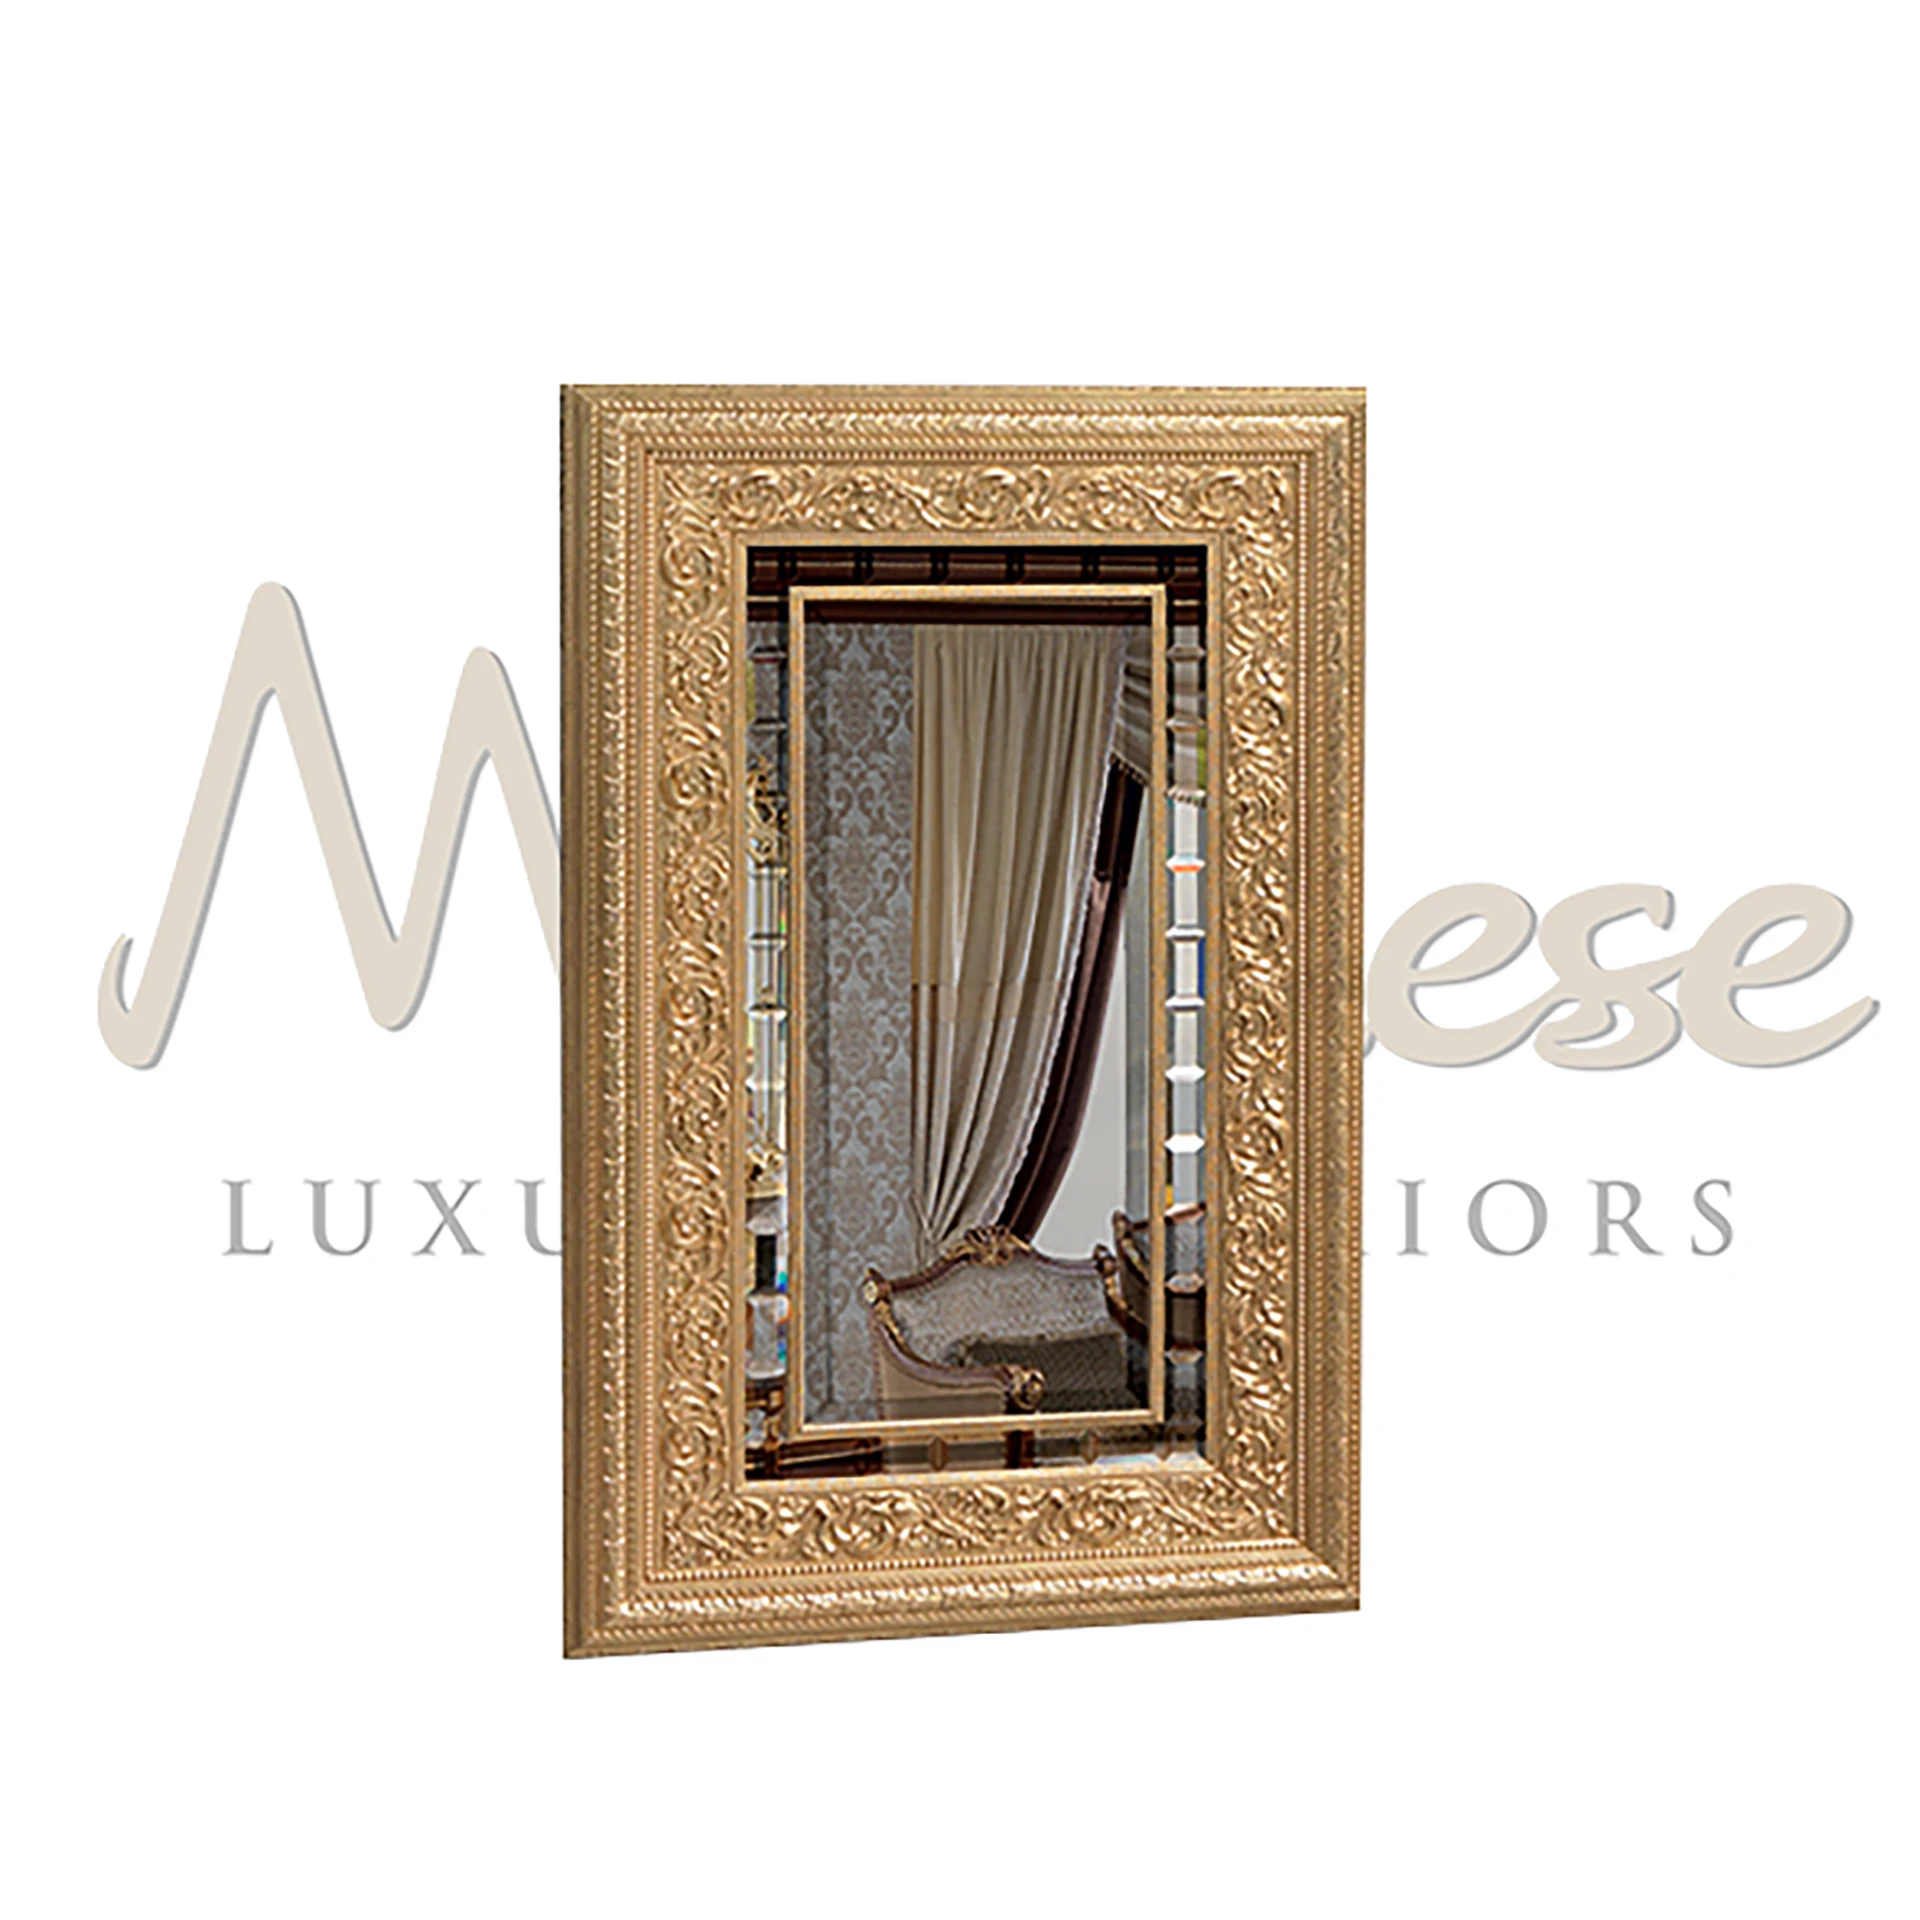 Classic Style Luxury Mirror with gold leaf finish, a symbol of sophistication, perfect for enhancing any interior design.